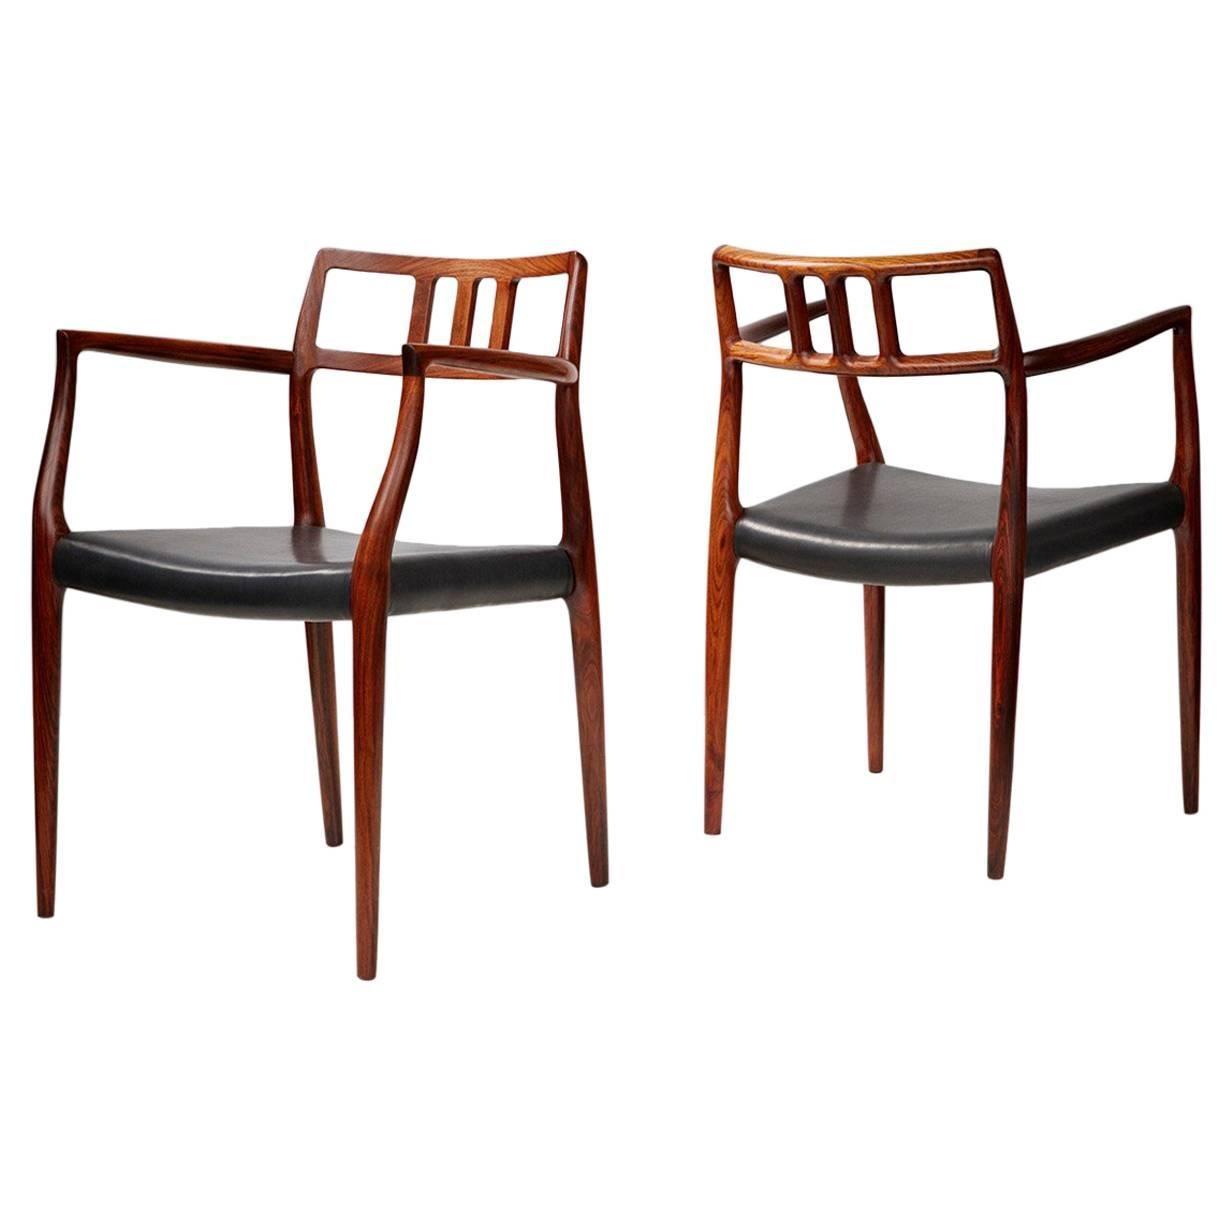 Model 64 Chairs by Niels Moller